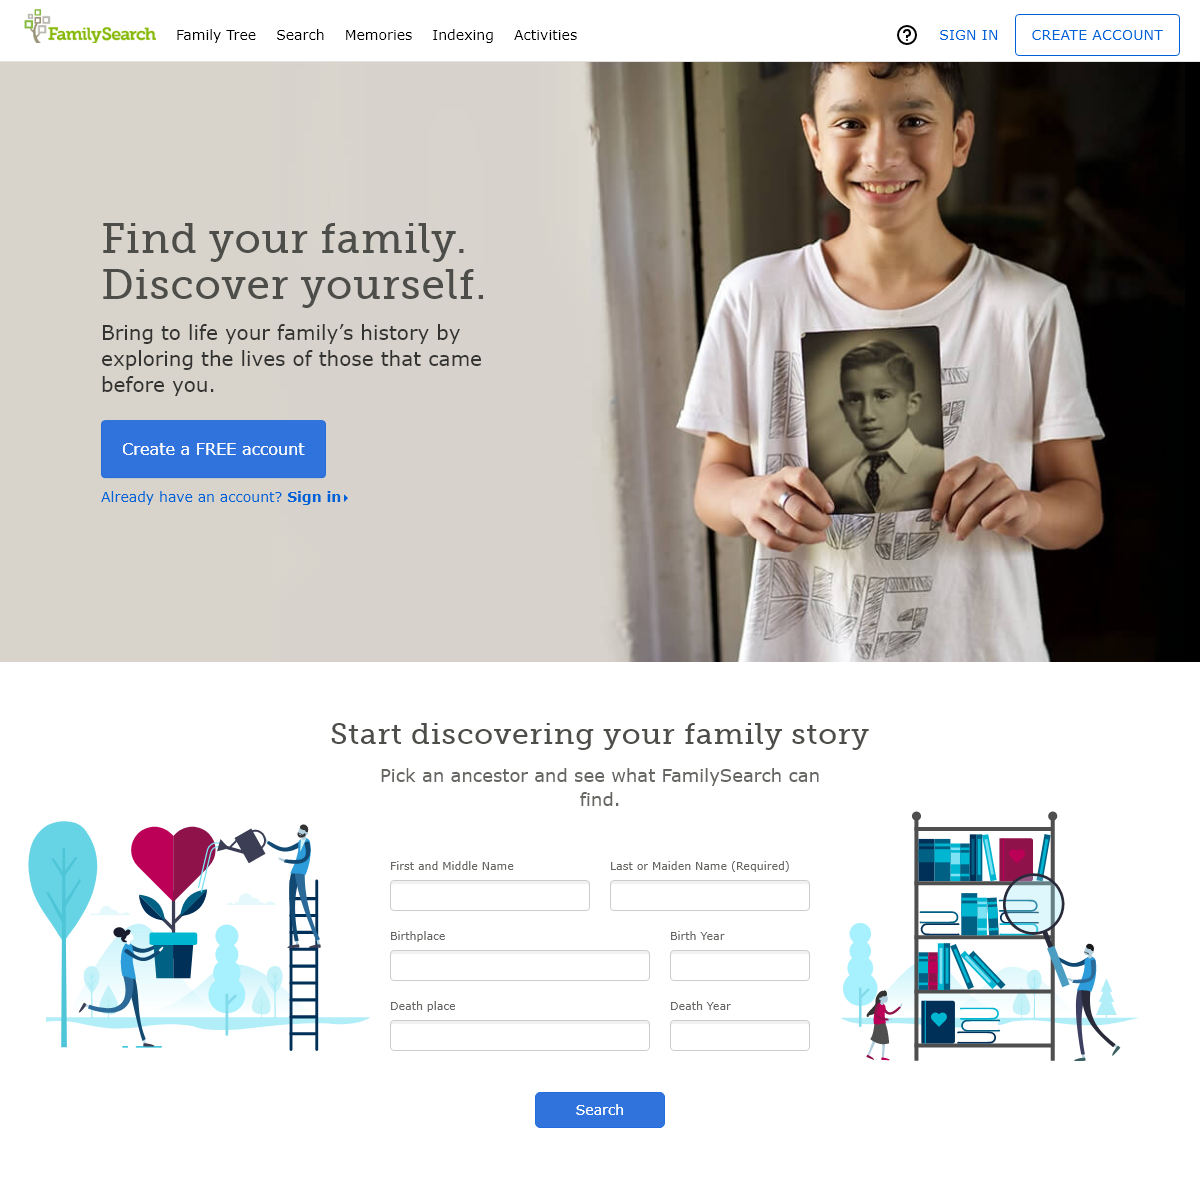 A complete backup of familysearch.org